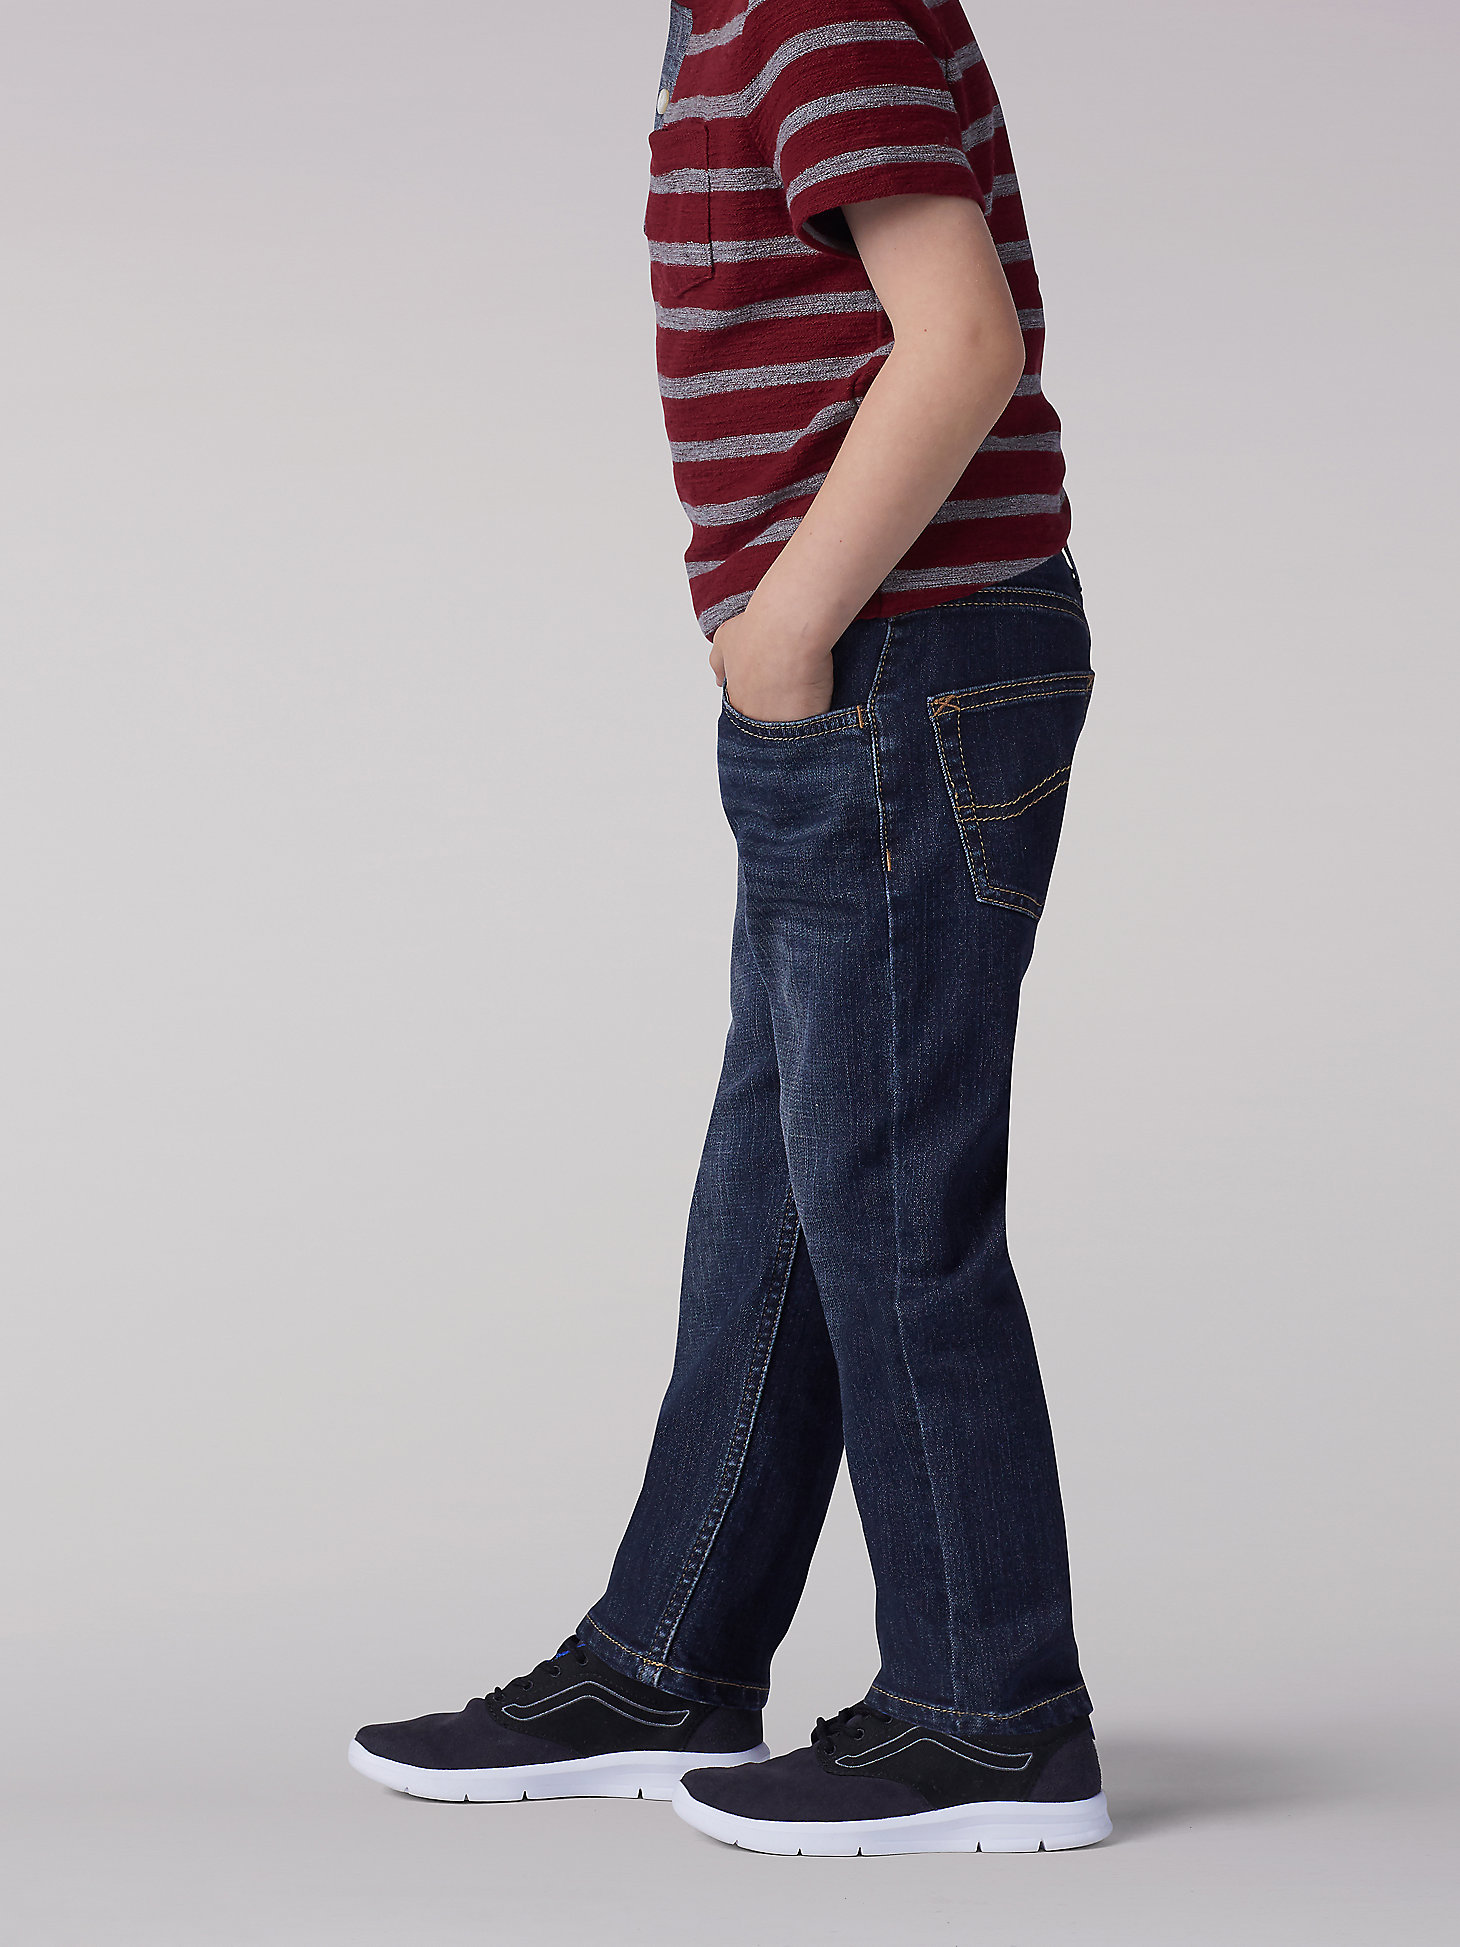 Boy’s Extreme Comfort Pull-On Relaxed Fit Jean - 4-7 in Mullen alternative view 2